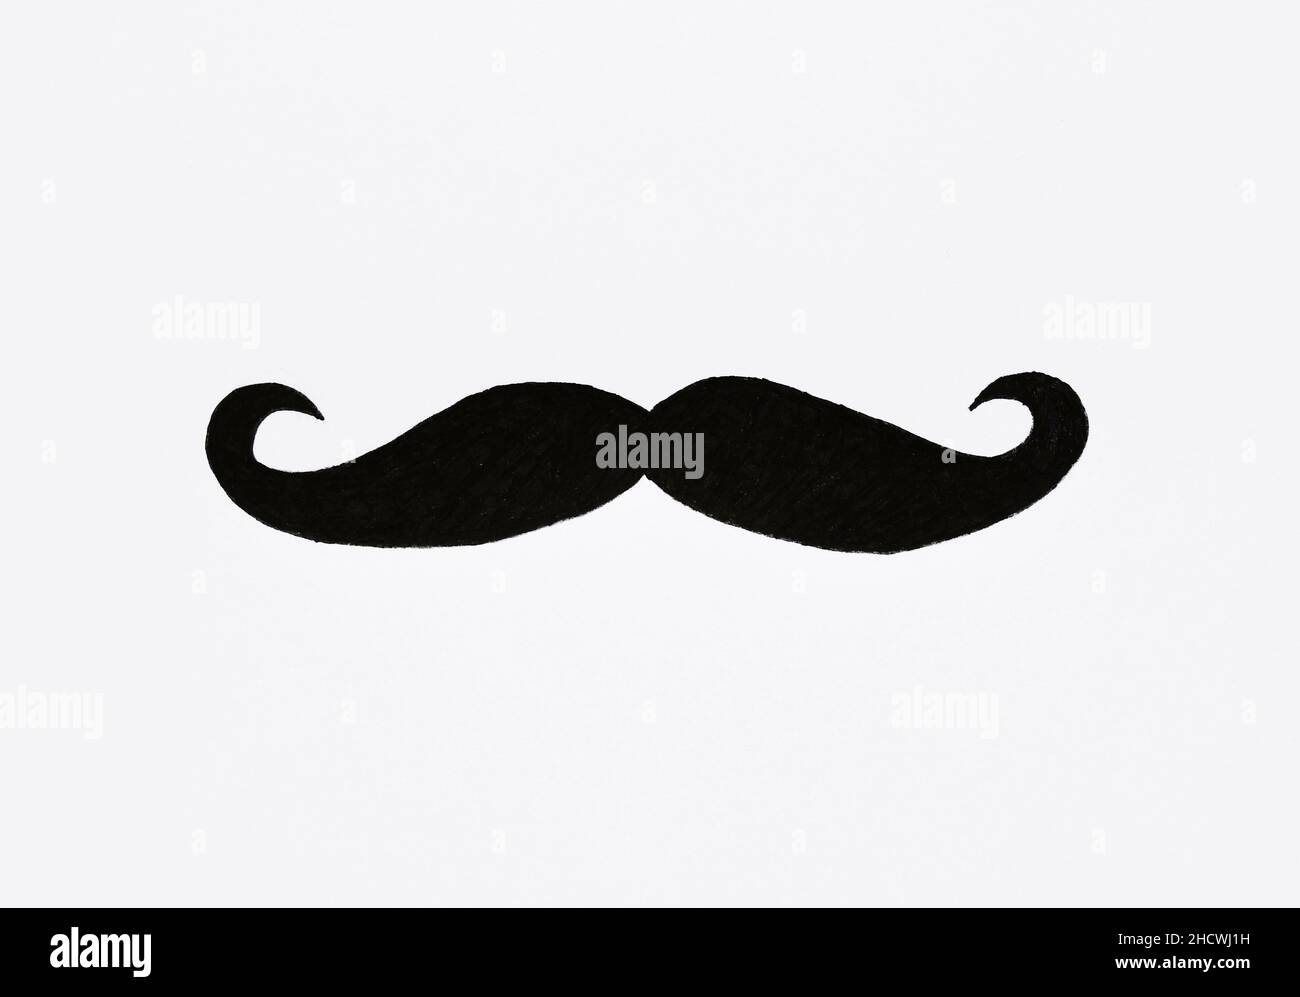 Overhead of a drawing of a moustache on white paper or background Stock Photo